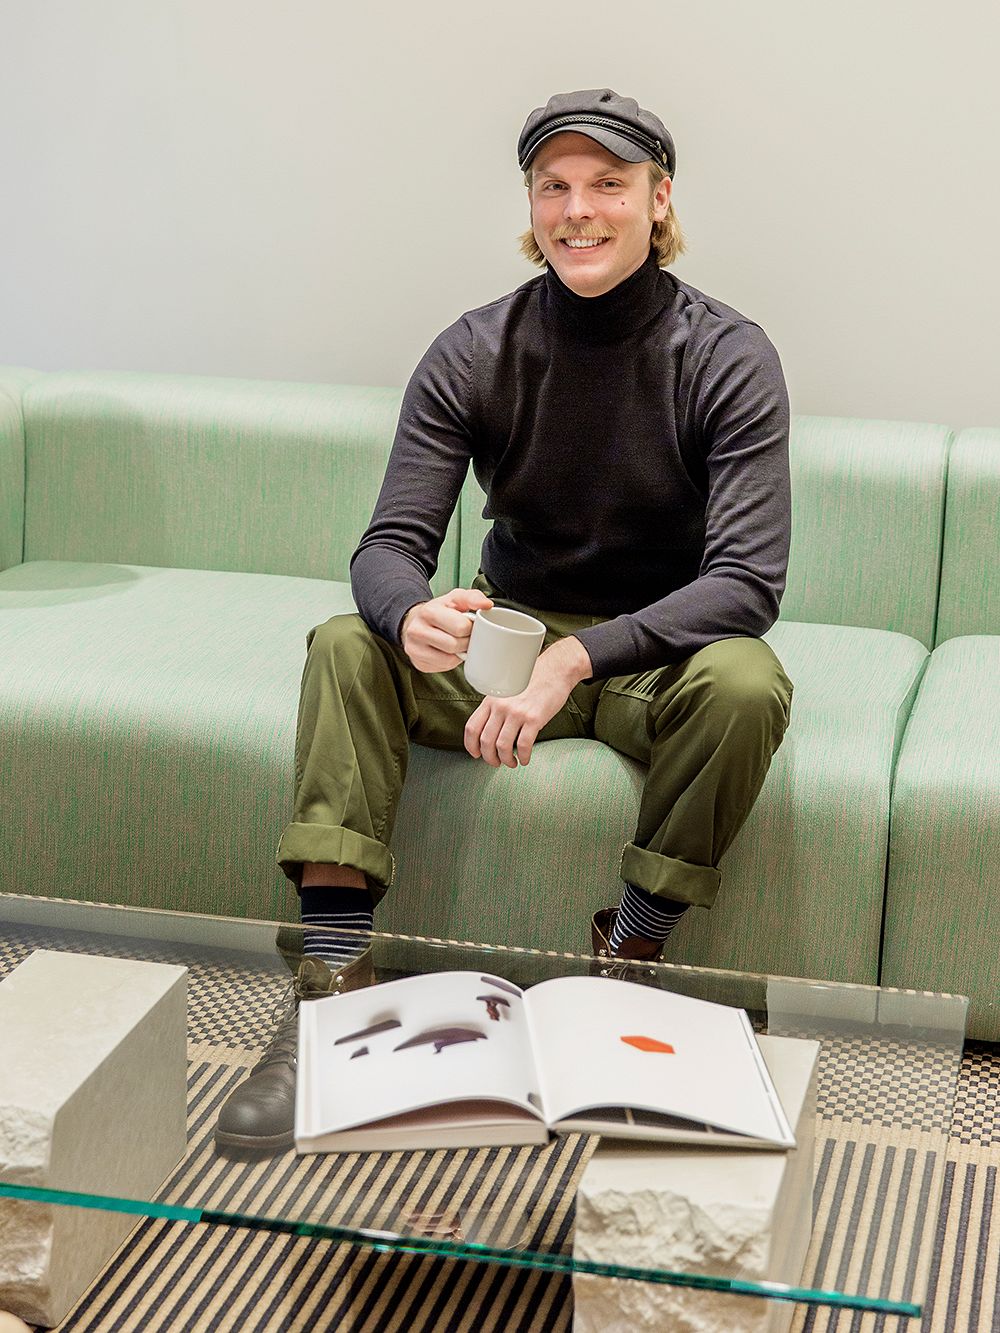 Design Sales Representative Matias Rahkola sitting on a green sofa with a cup of coffee in his hand.